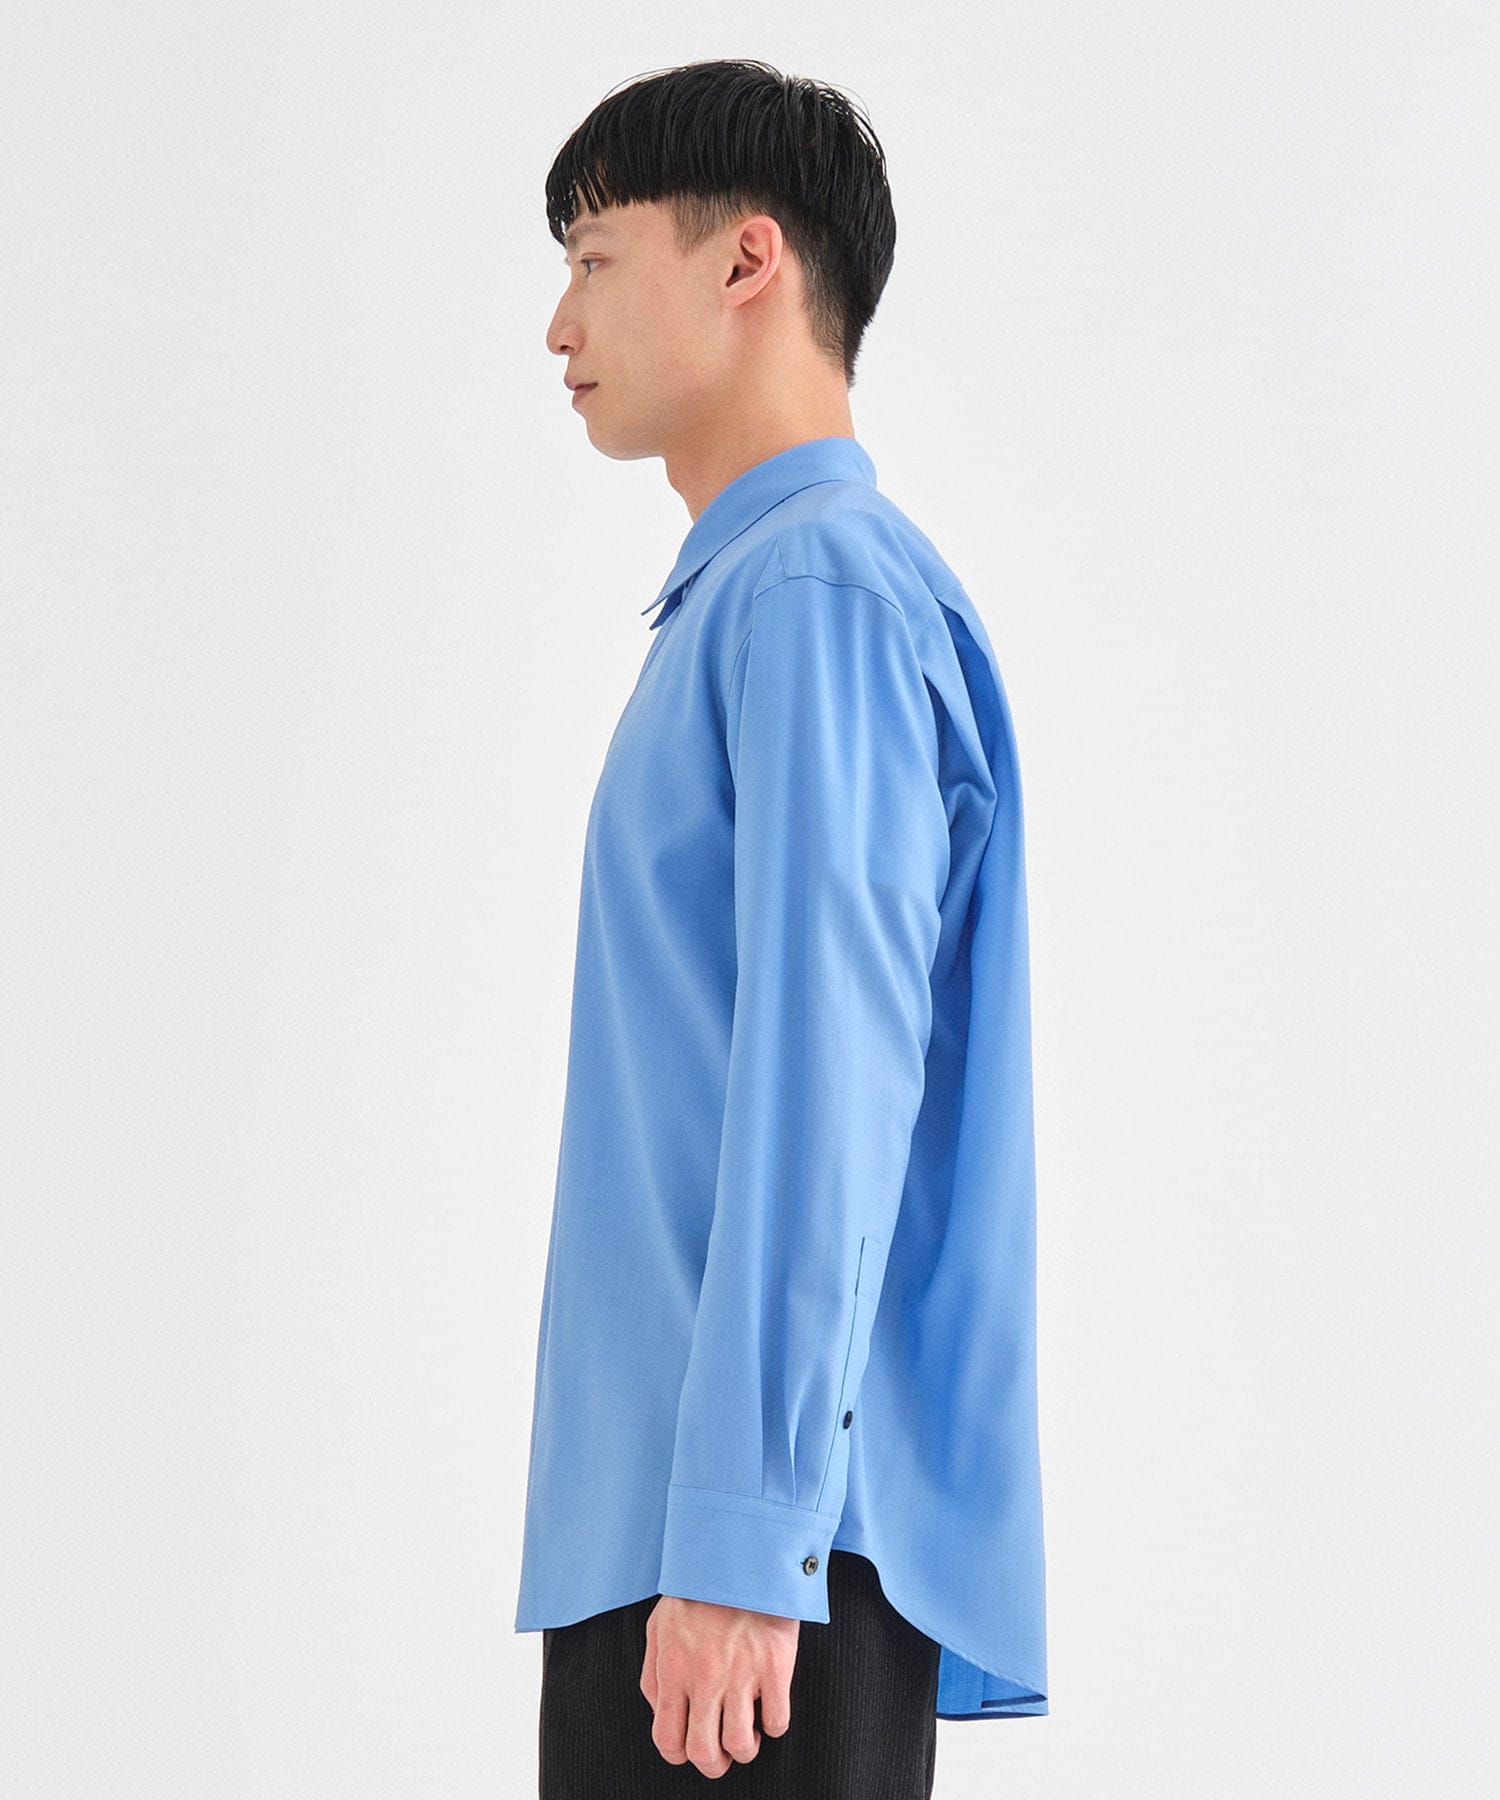 Dropped Shoulder Top with Shirt Collar OVERCOAT